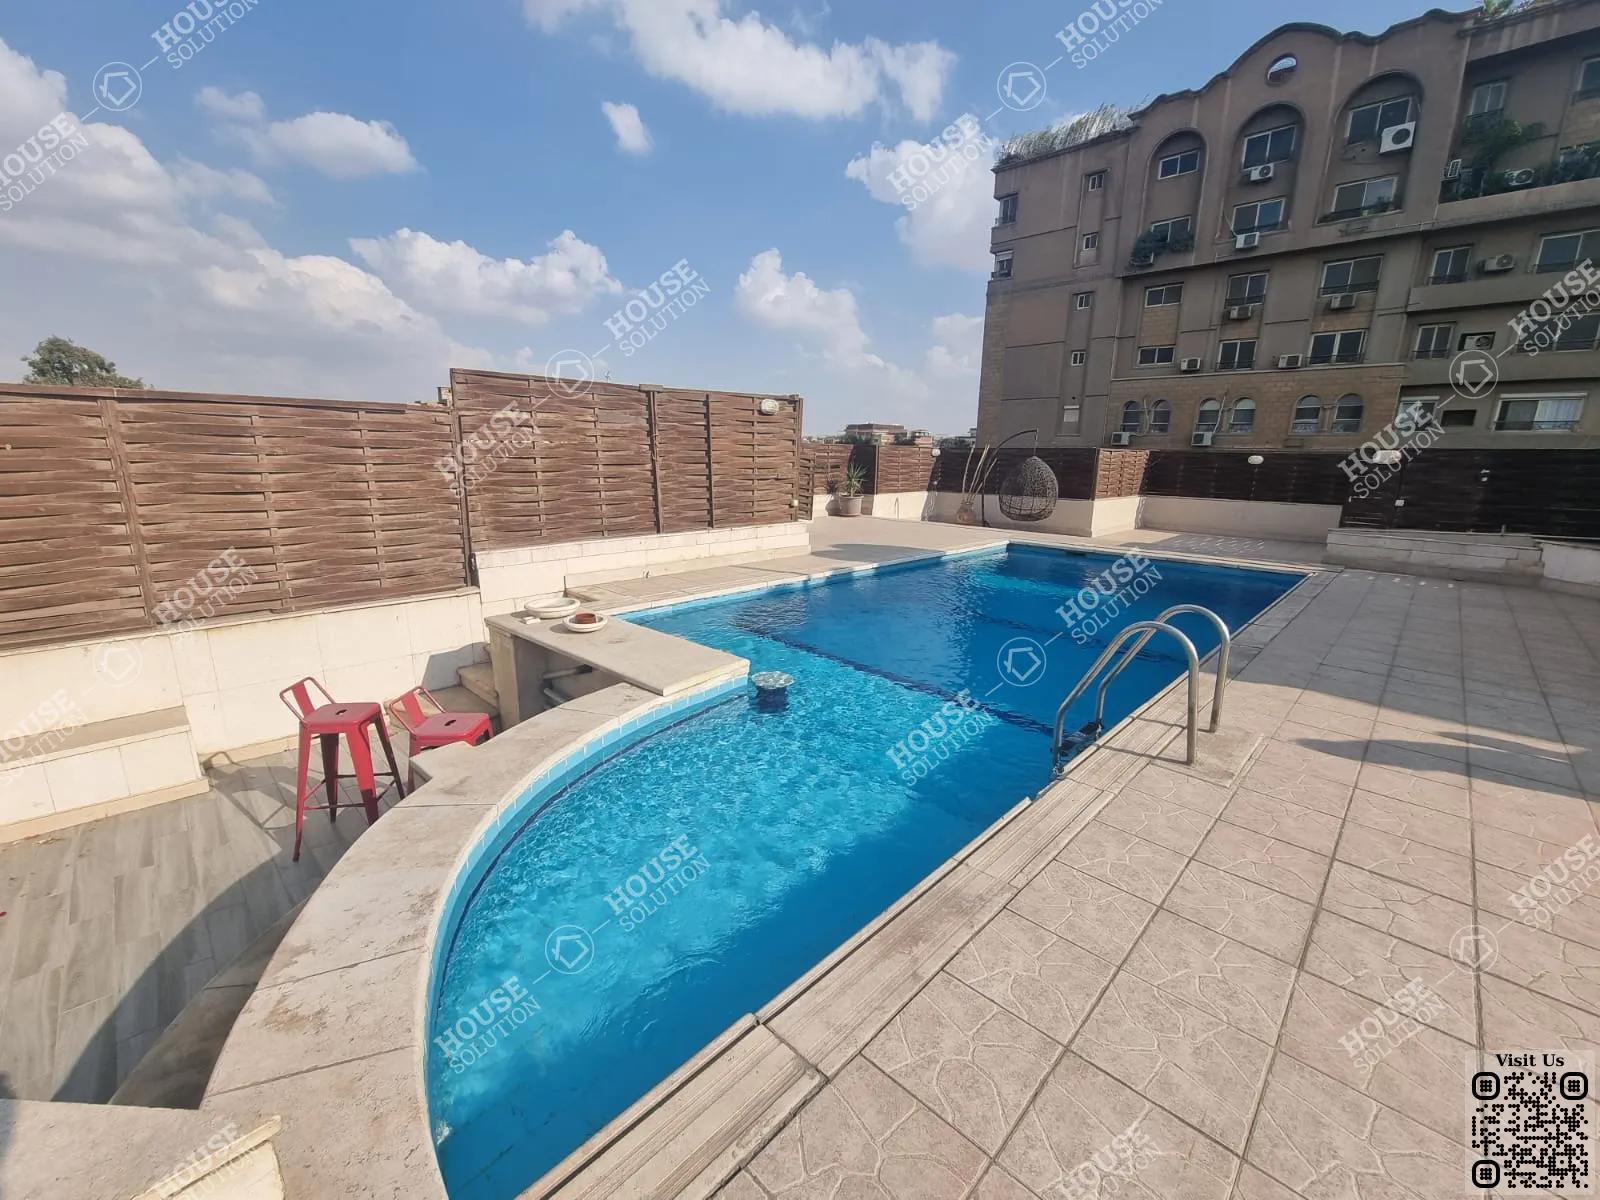 SHARED SWIMMING POOL  @ Ground Floors For Rent In Maadi Maadi Sarayat Area: 150 m² consists of 2 Bedrooms 2 Bathrooms Furnished 5 stars #5616-1